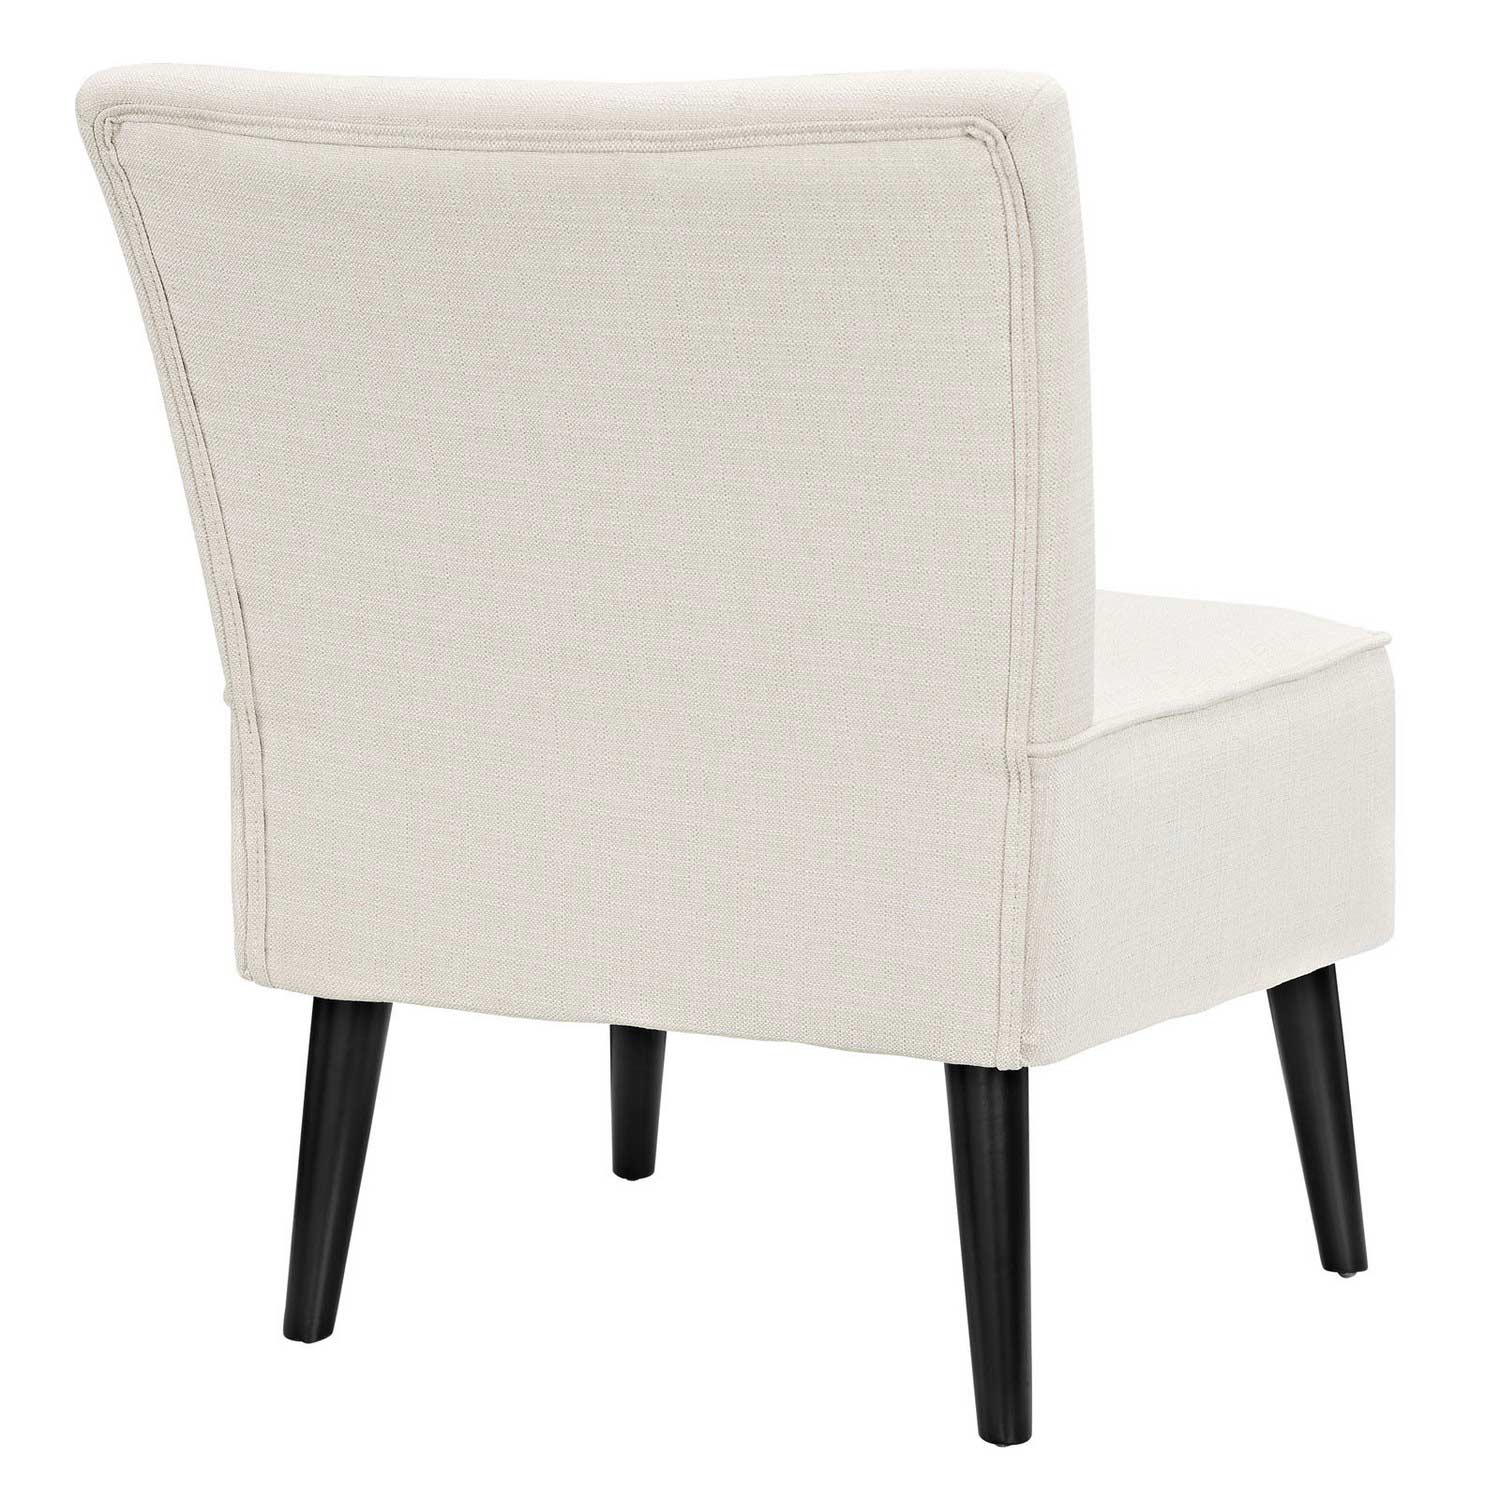 Modway Reef Fabric Side Chair - Beige